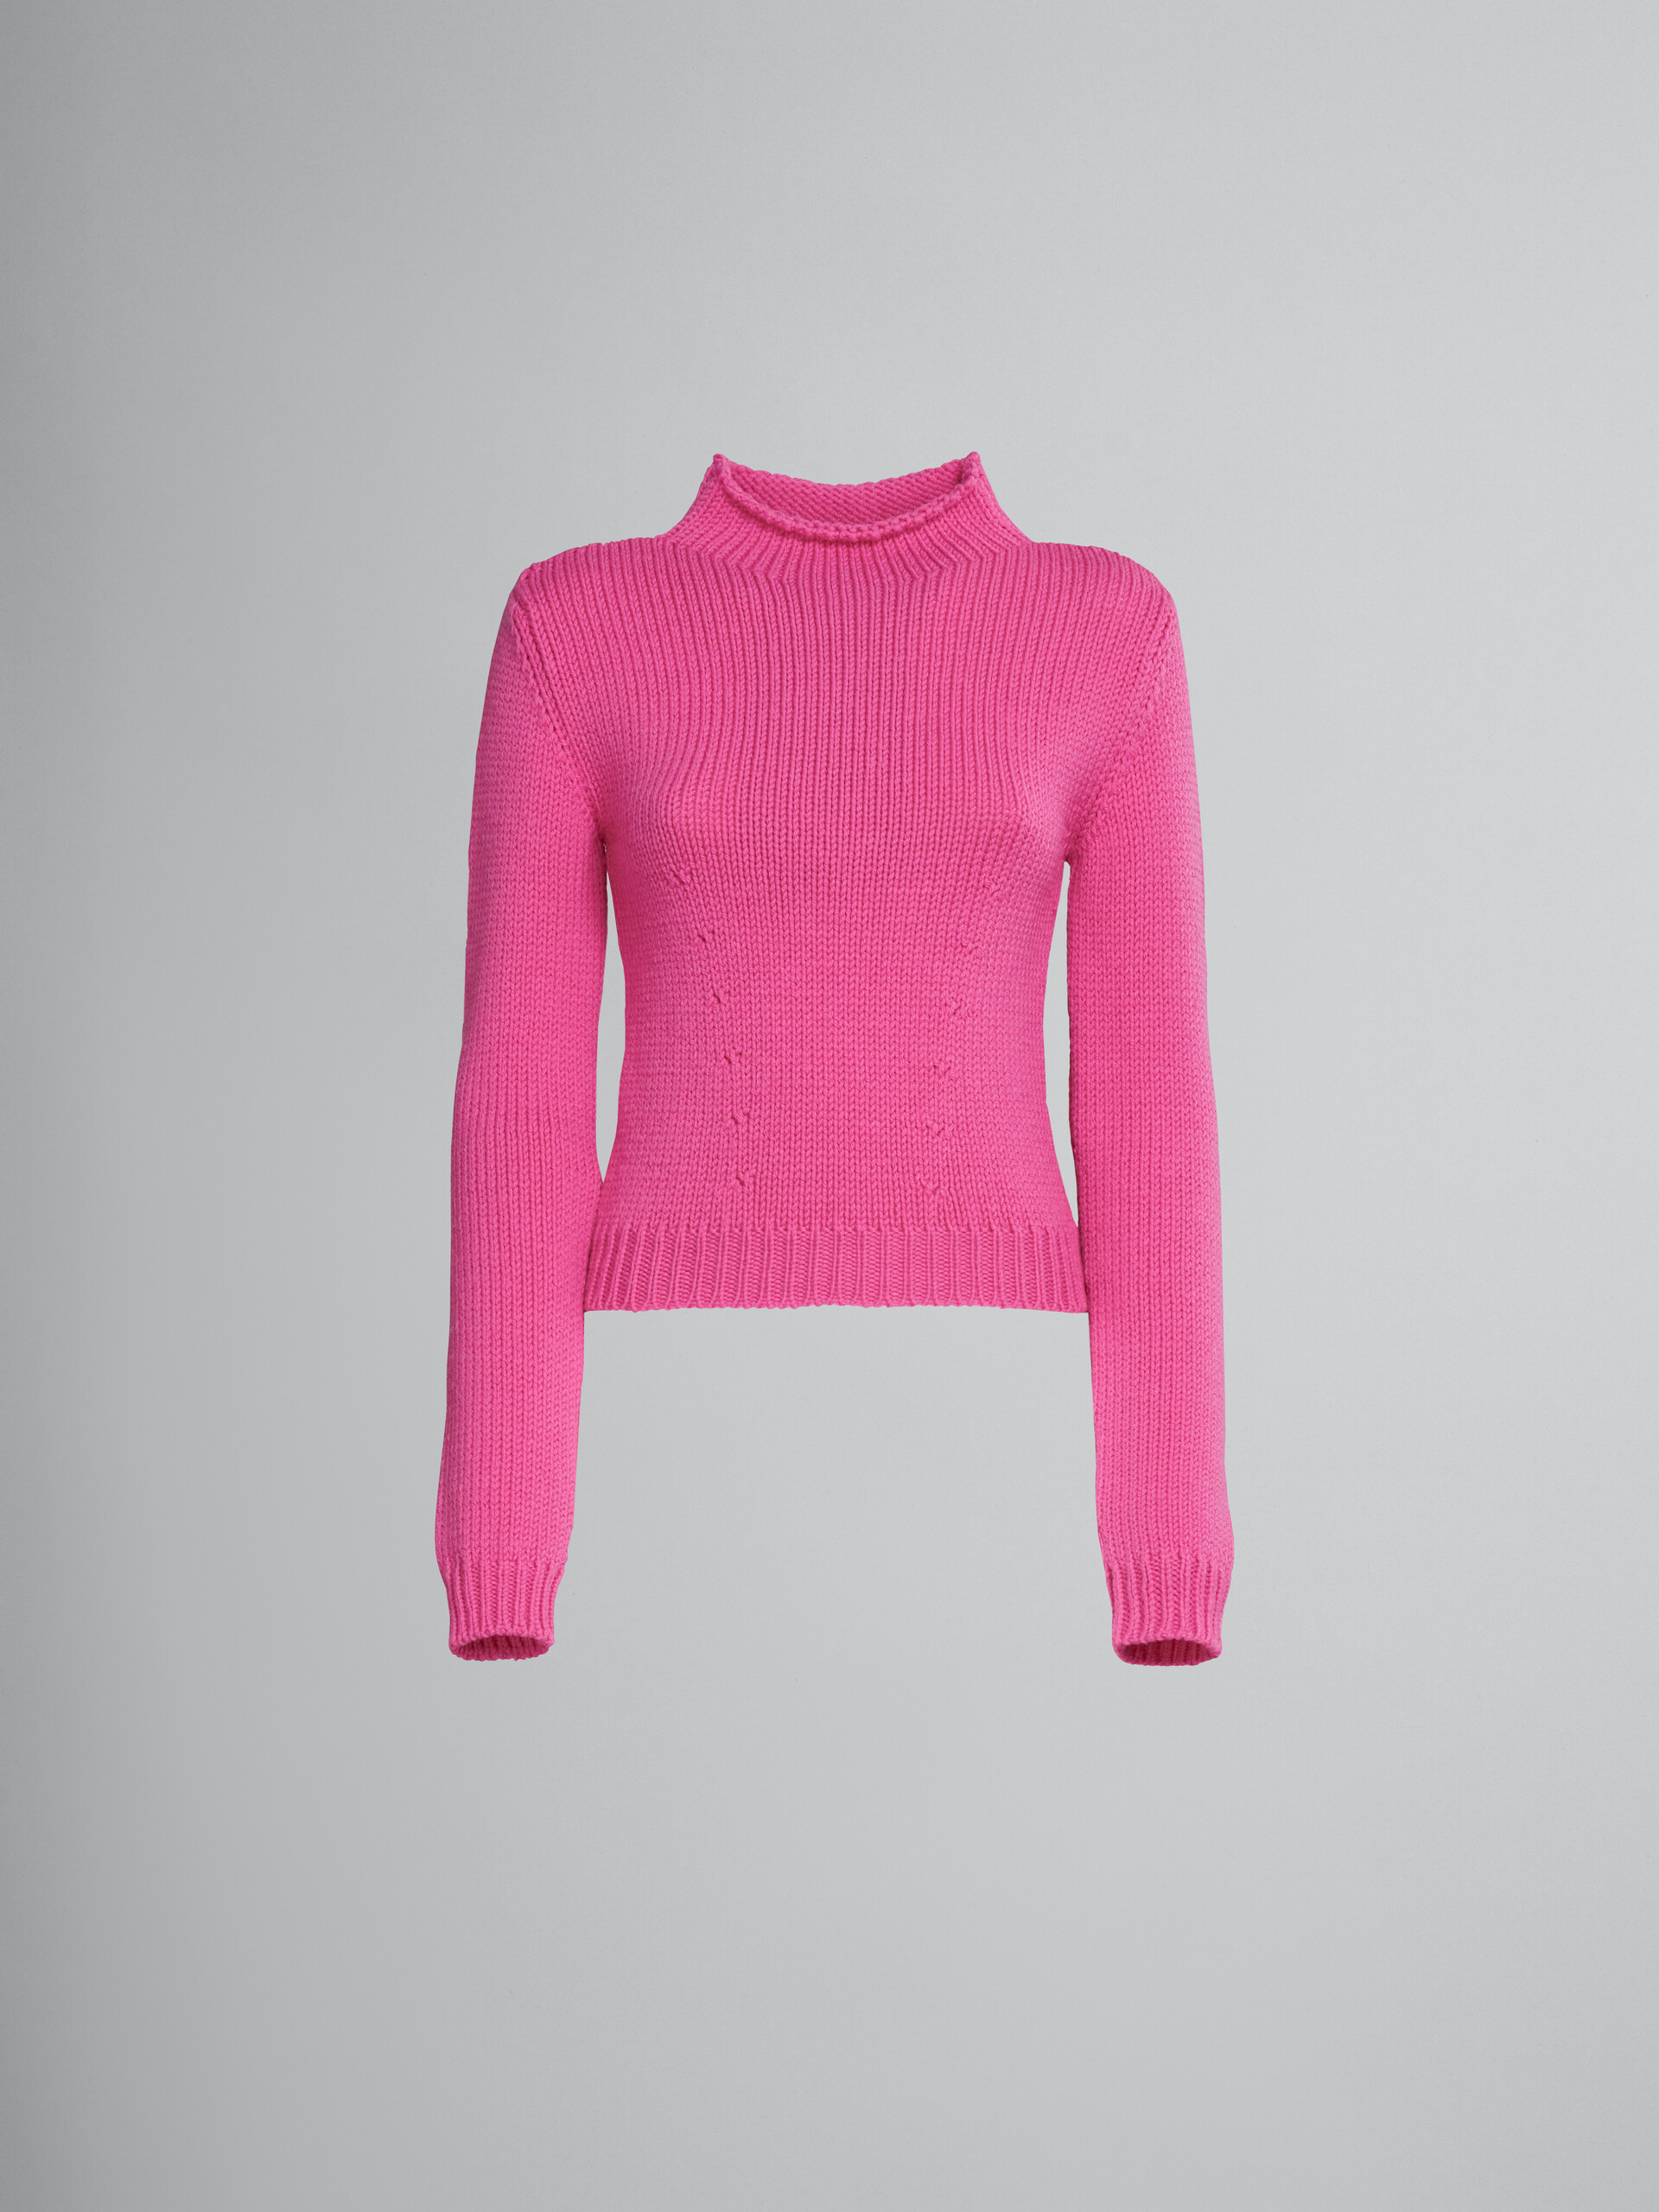 Fuchsia wool sweater with logo - Pullovers - Image 1